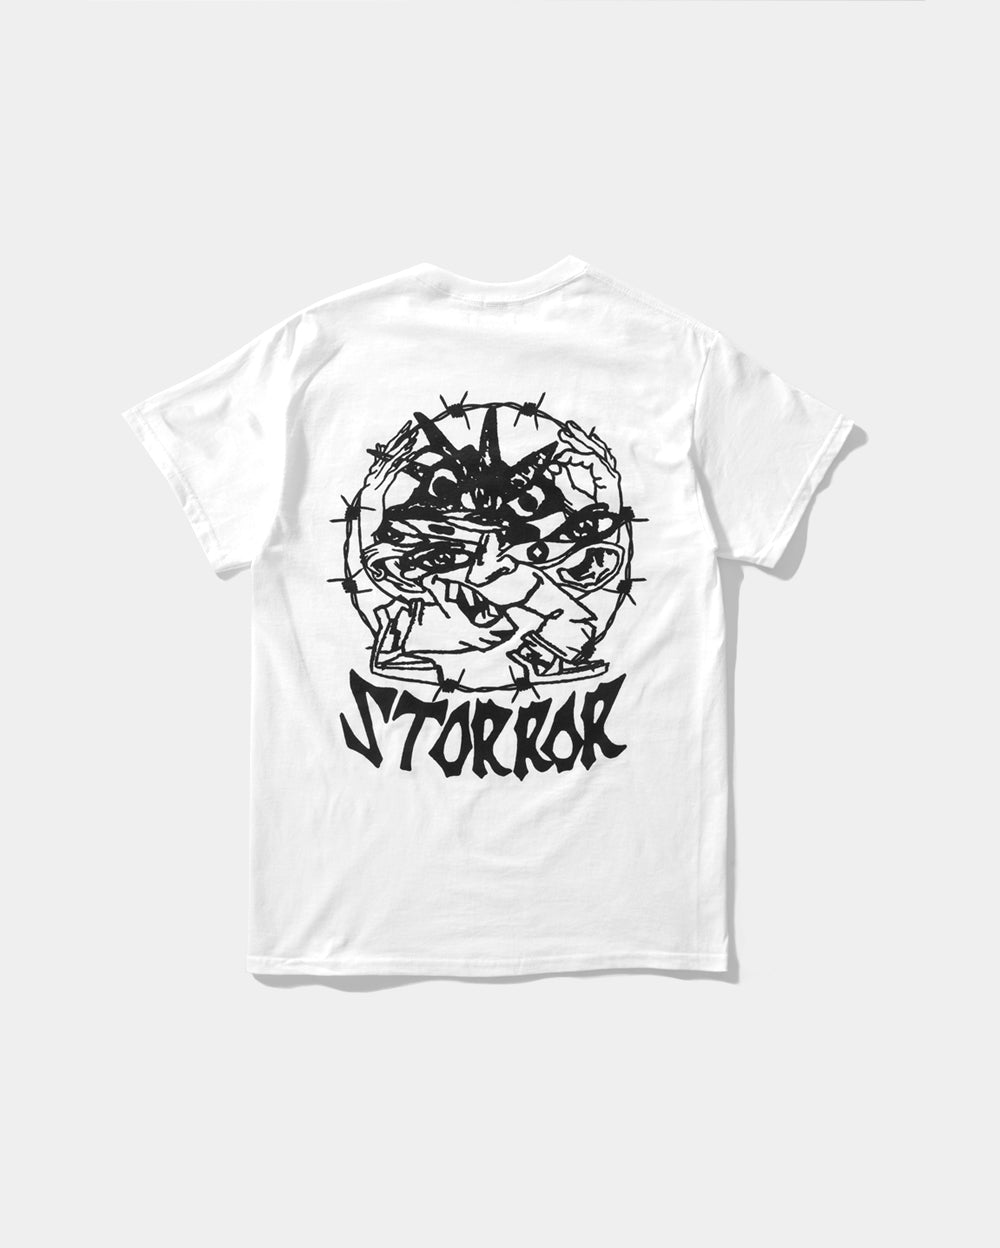 STORROR barbed t-shirt. Back. Parkour Clothing. Functional Streetwear. 